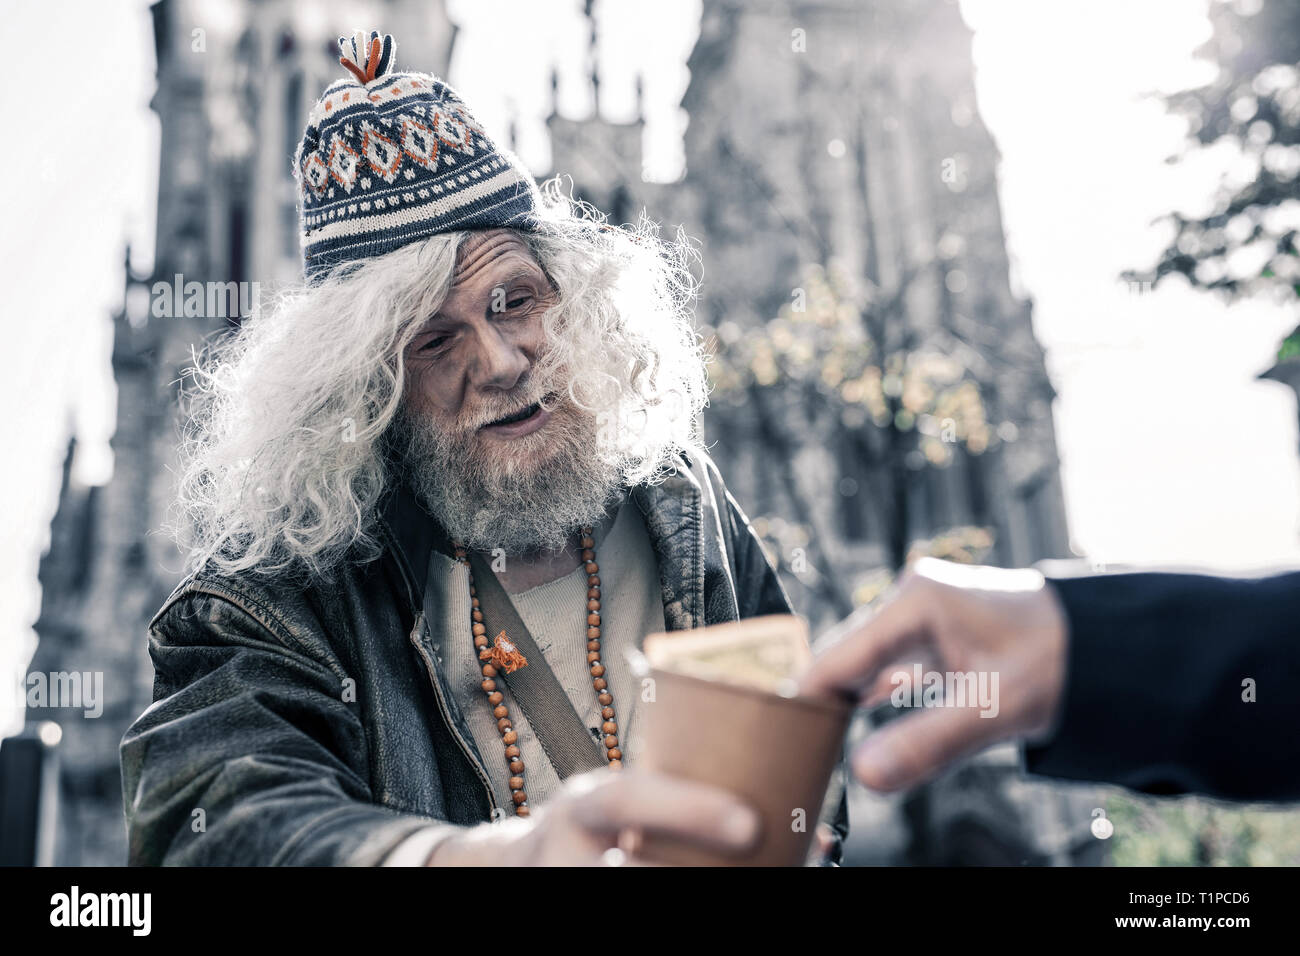 Drunk filthy man living on the street and begging pedestrians Stock Photo